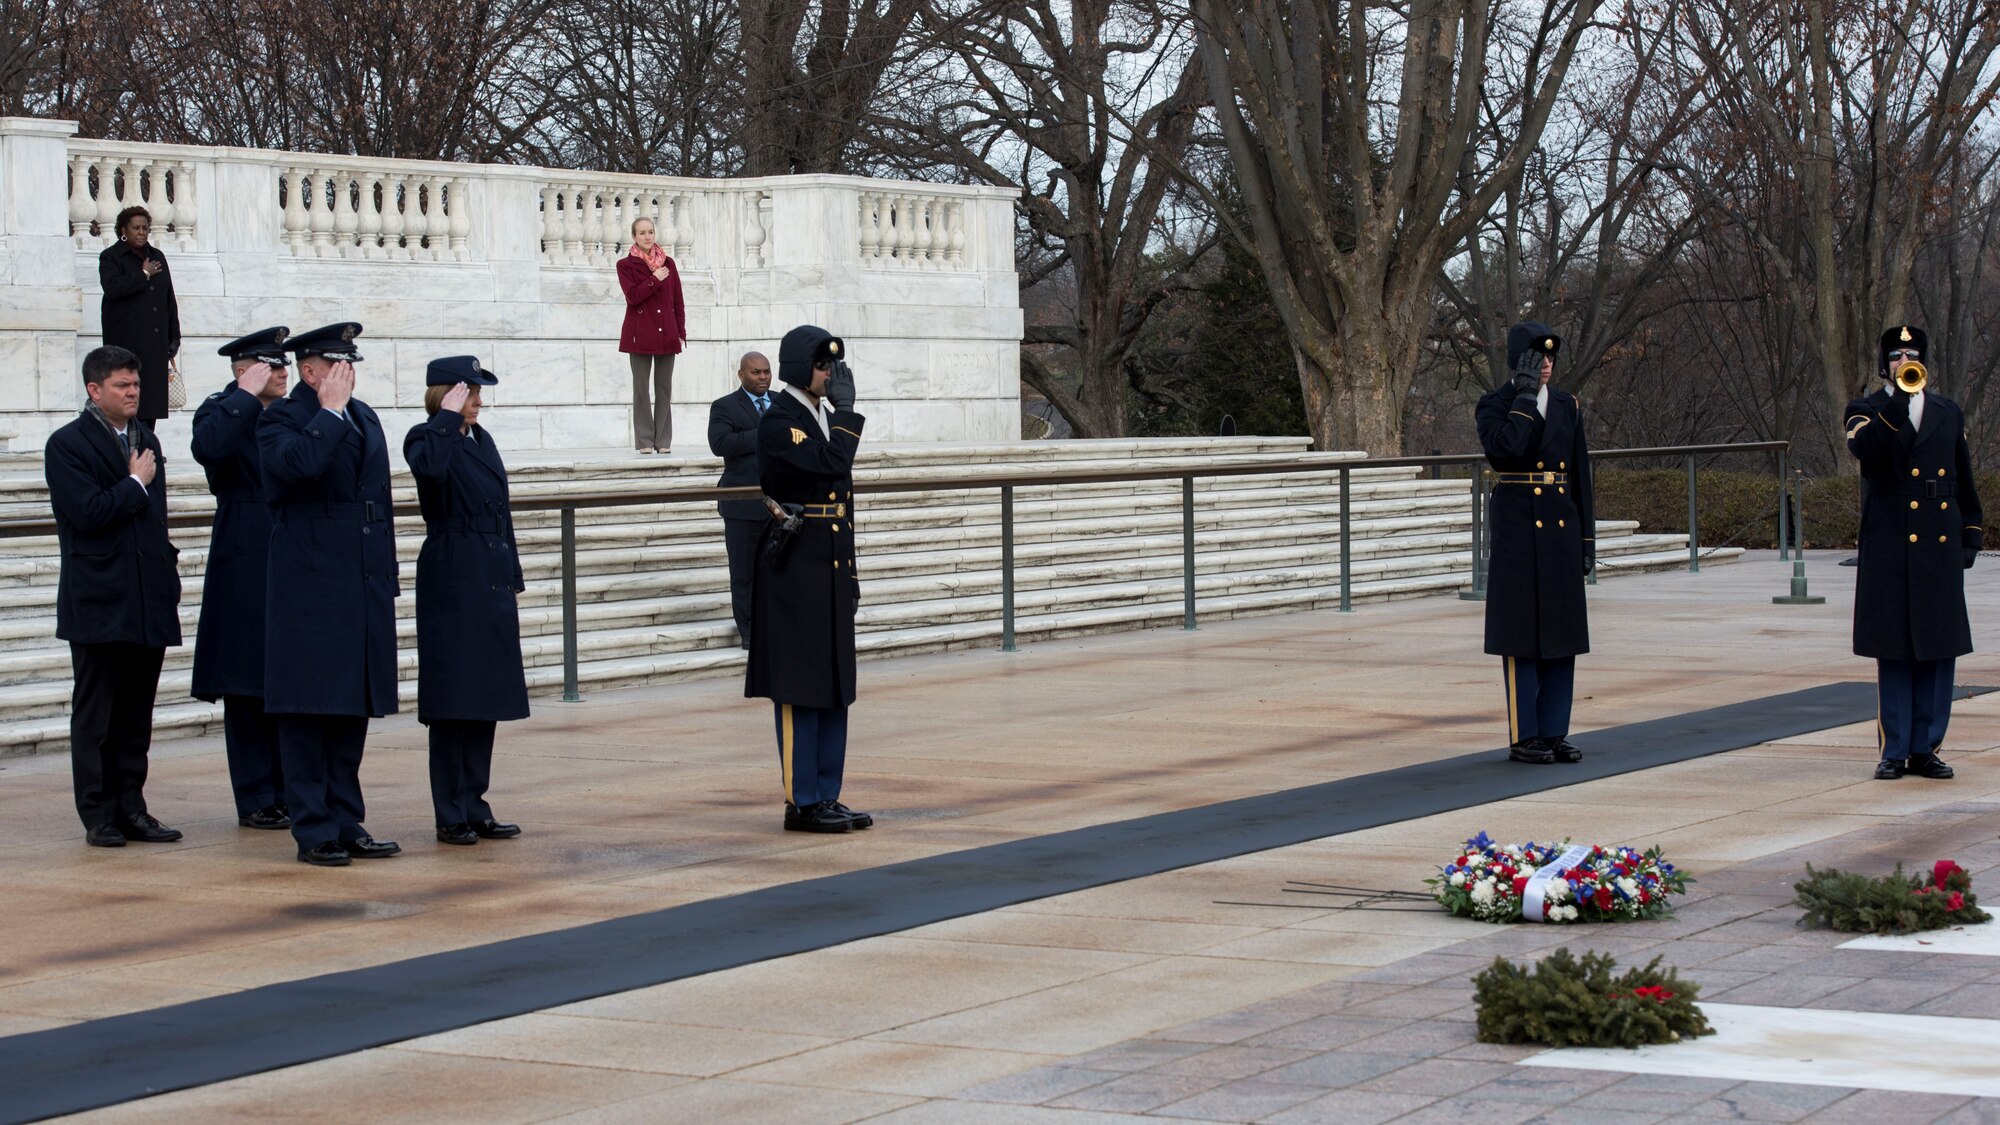 Air Force Office of Special Investigations Headquarters leadership, left, render honors with members of the 3rd U.S. Infantry Regiment (The Old Guard) during the laying of the AFOSI wreath at the Tomb of the Unknown Soldier at Arlington National Cemetery, Va., Jan. 7, 2020. (U.S. Air Force photo by Staff Sgt. Jeremy Mosier, SAF/PAI)